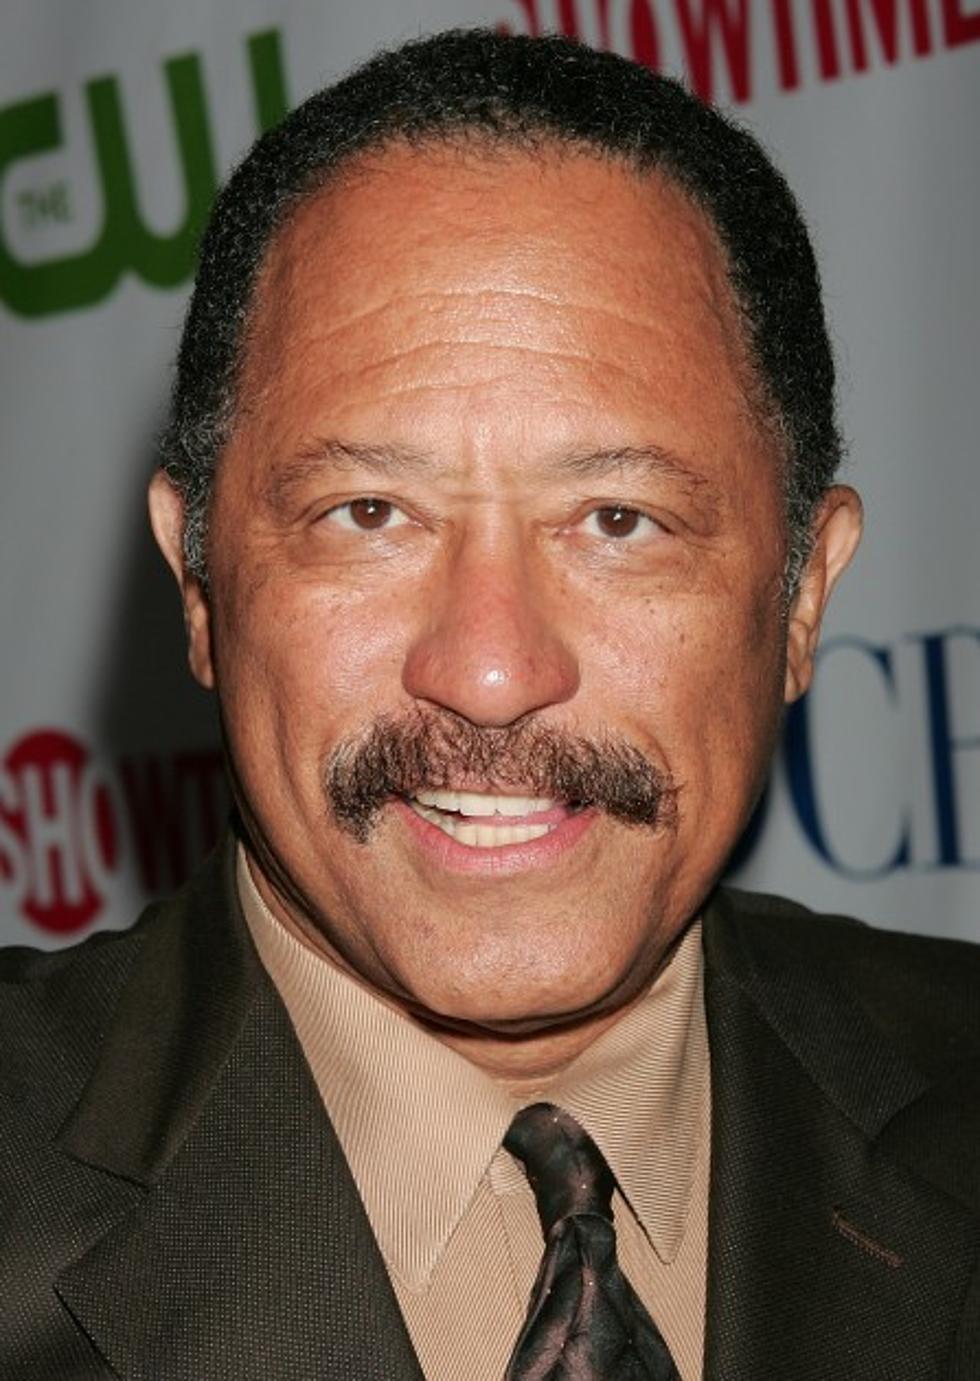 Judge Joe Brown Comes To An End This Fall [VIDEO]